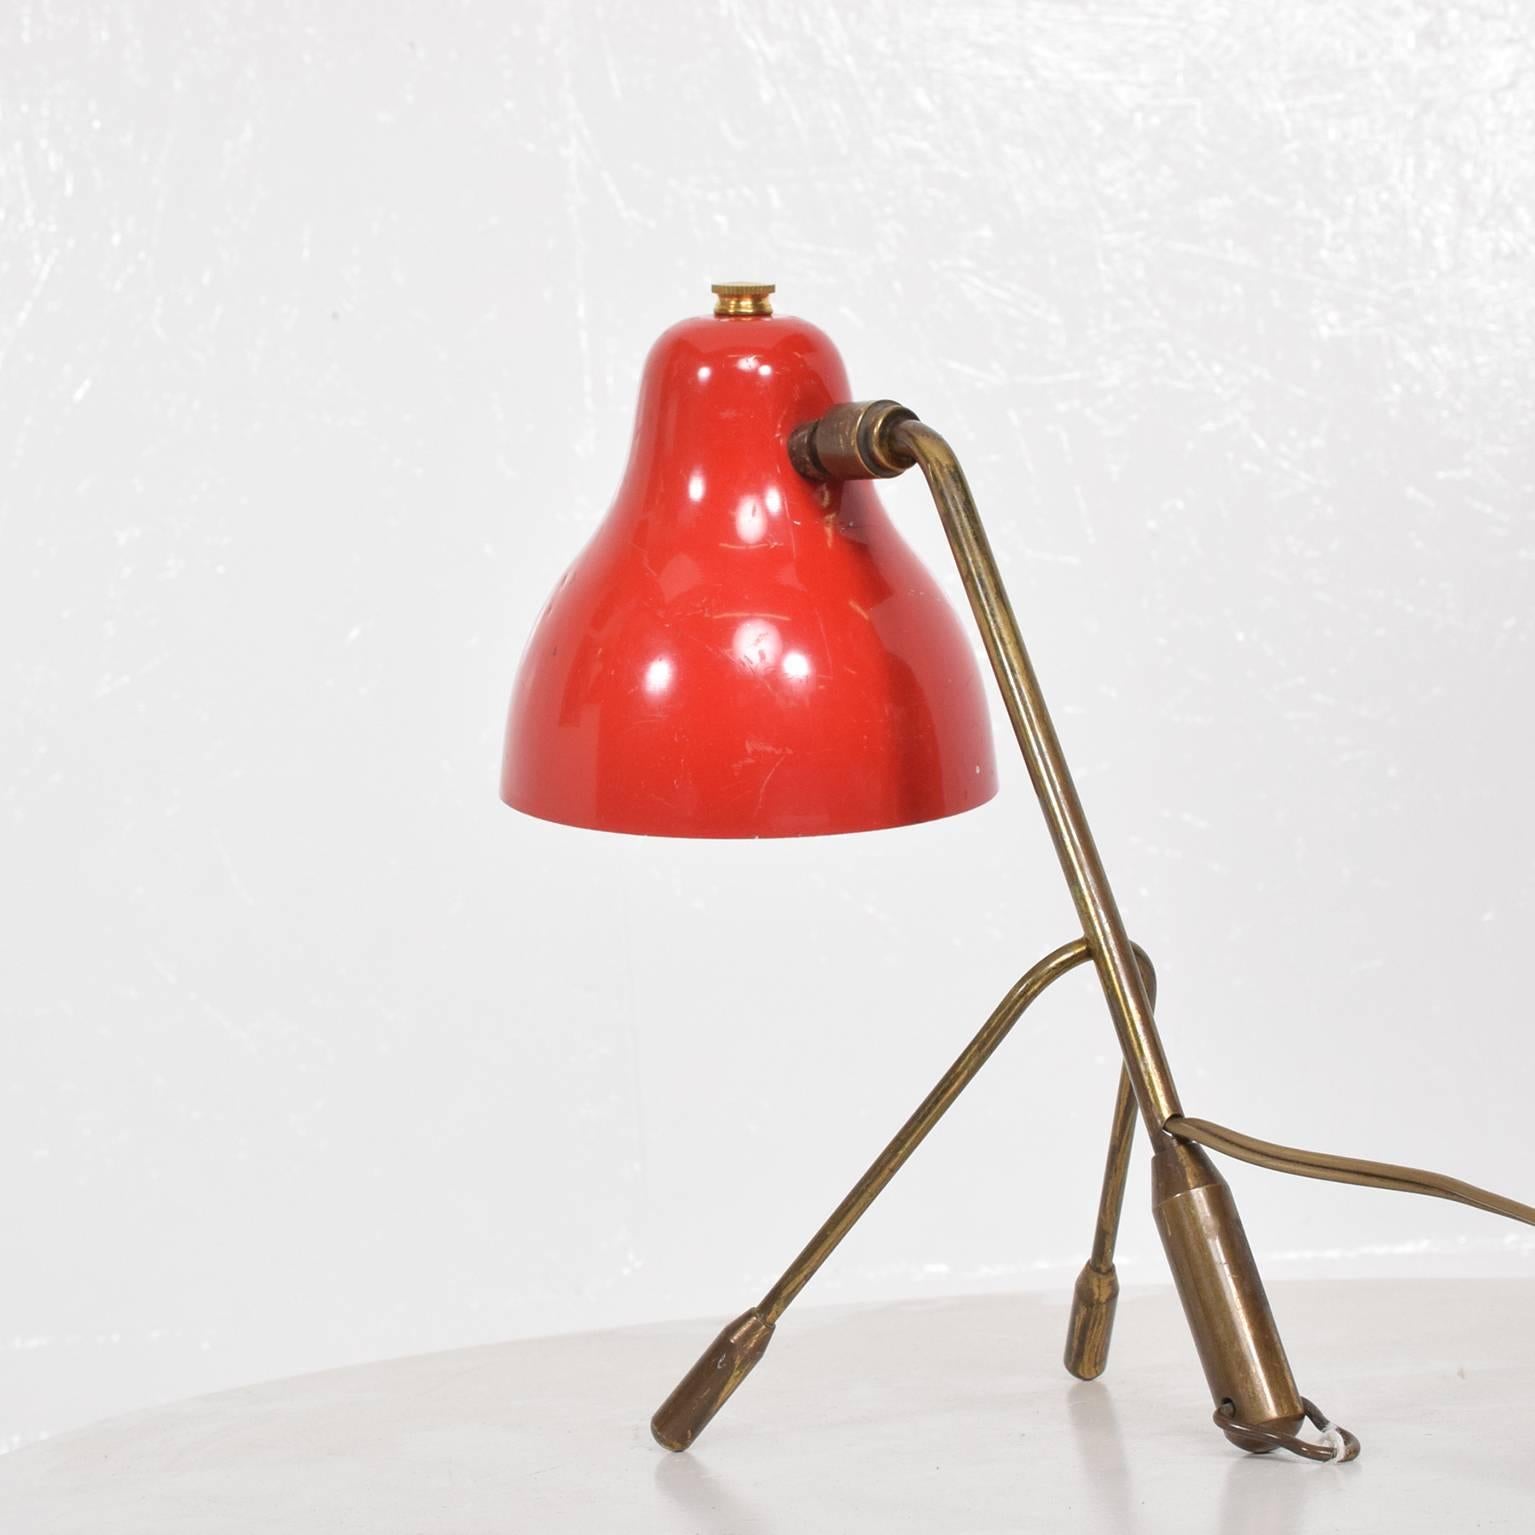 We are pleased to offer for your consideration a vintage table lamp. Made in Italy, circa 1960s. Aluminium shade in red color with brass body with original vintage patina.

Unmarked. Gently used. Original vintage condition. Rewired.